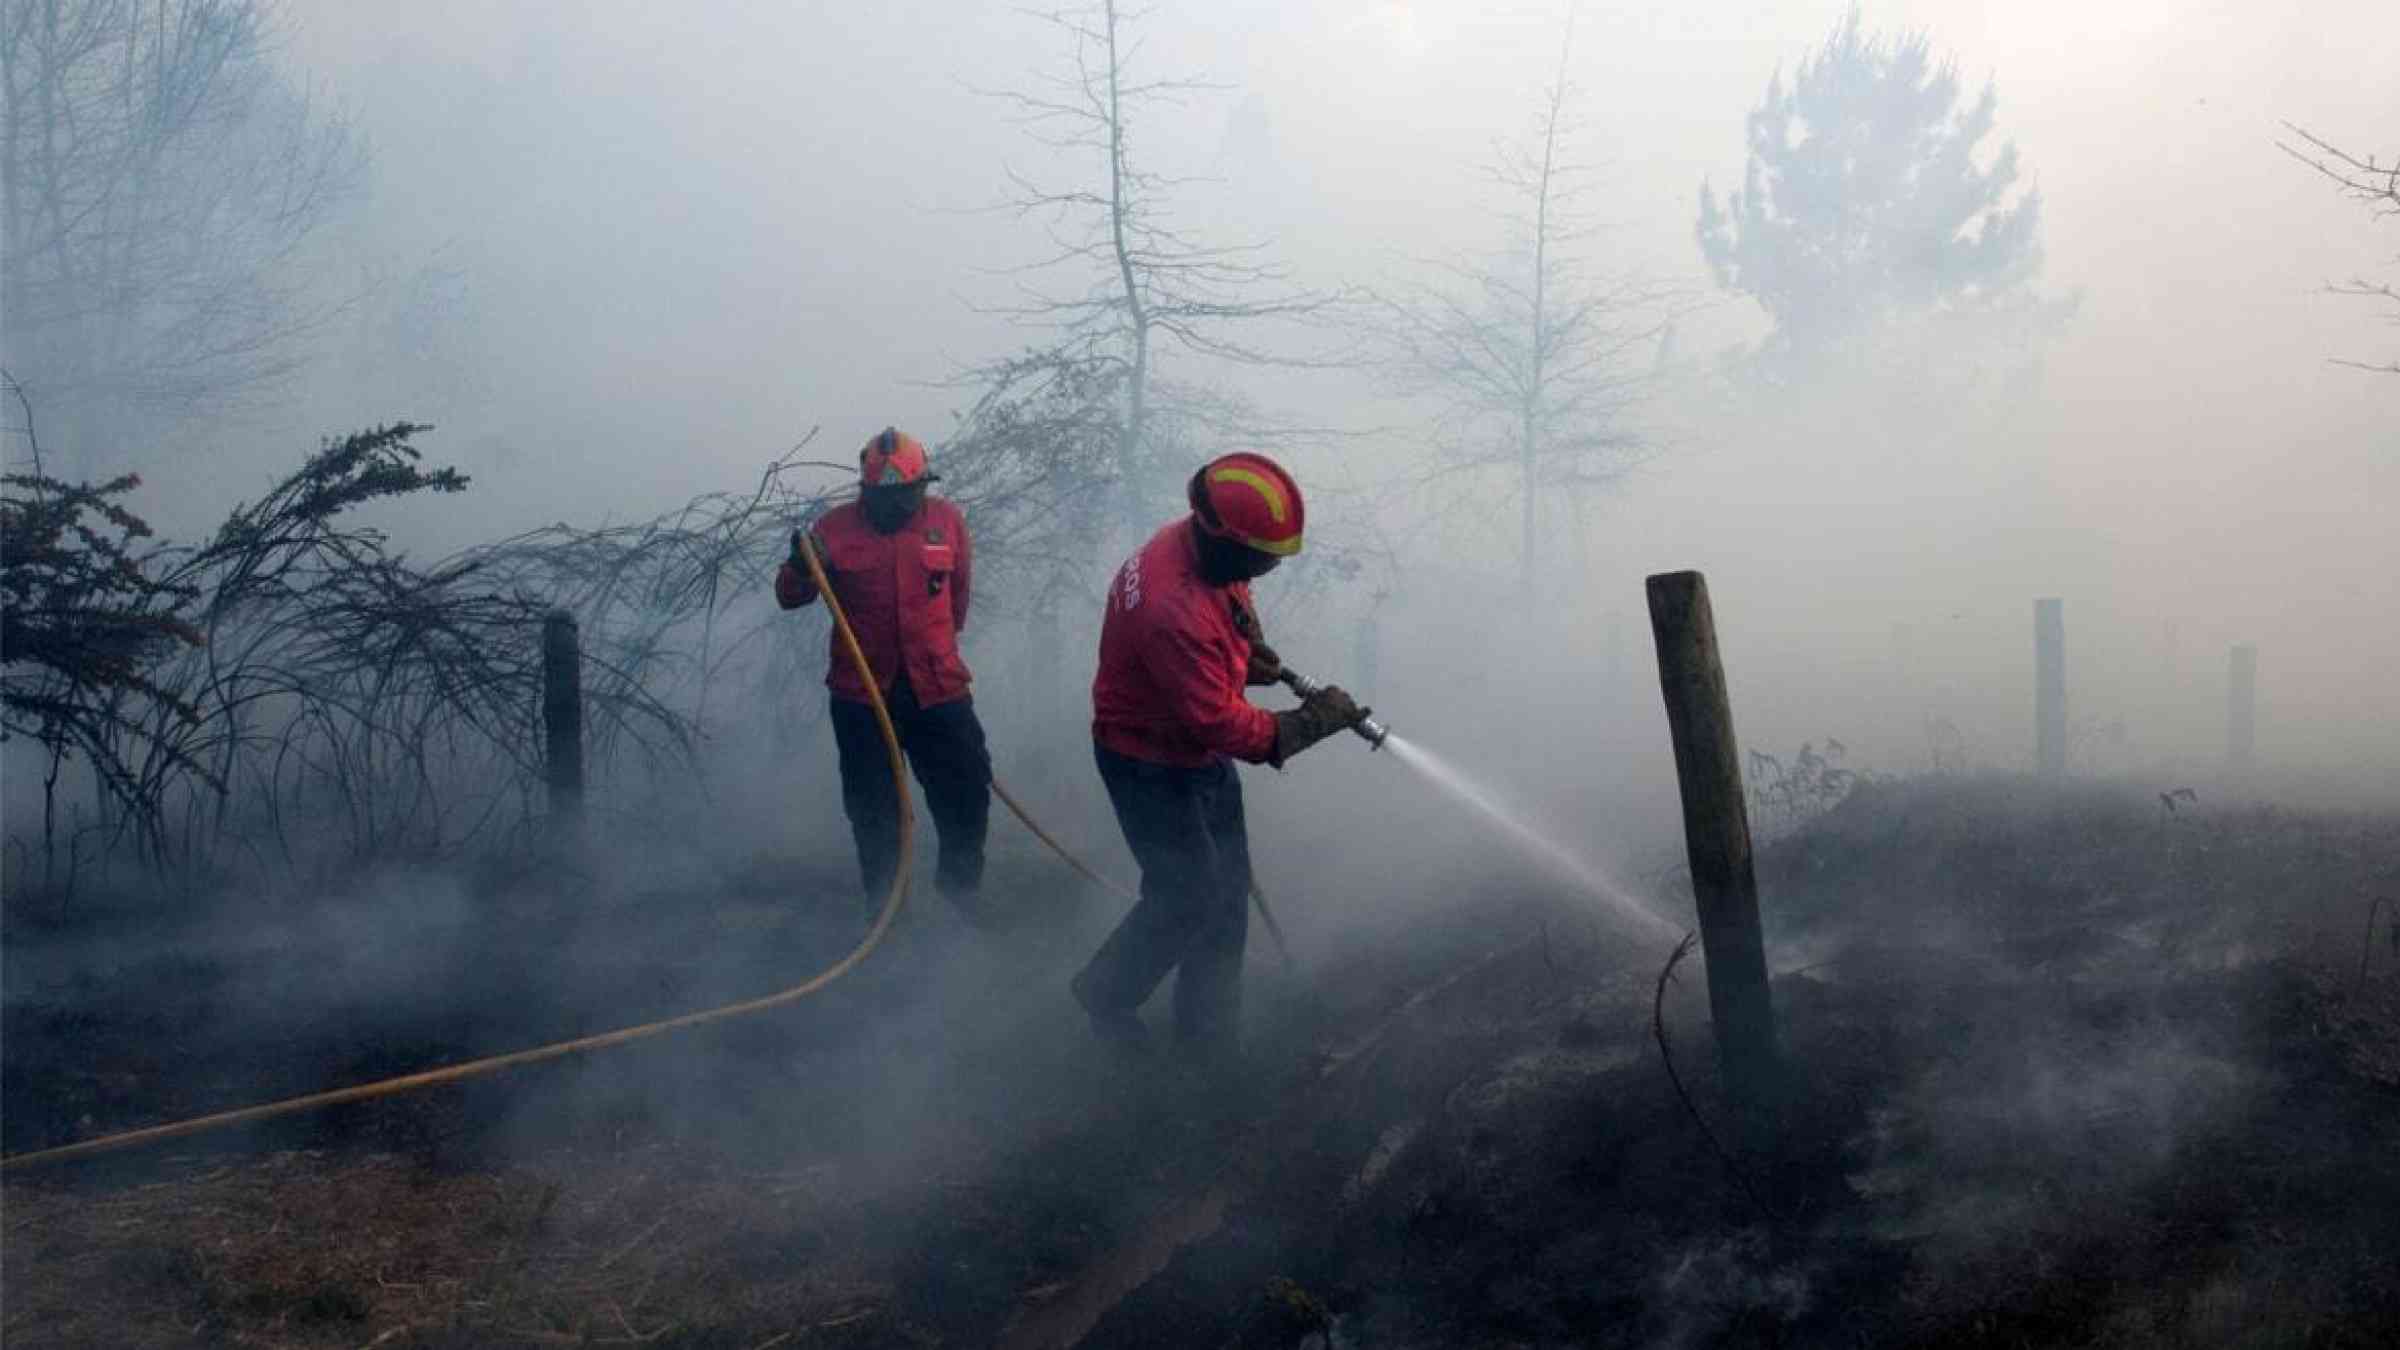 Portuguese firefighters extinguish a wildfire outside Guimarães